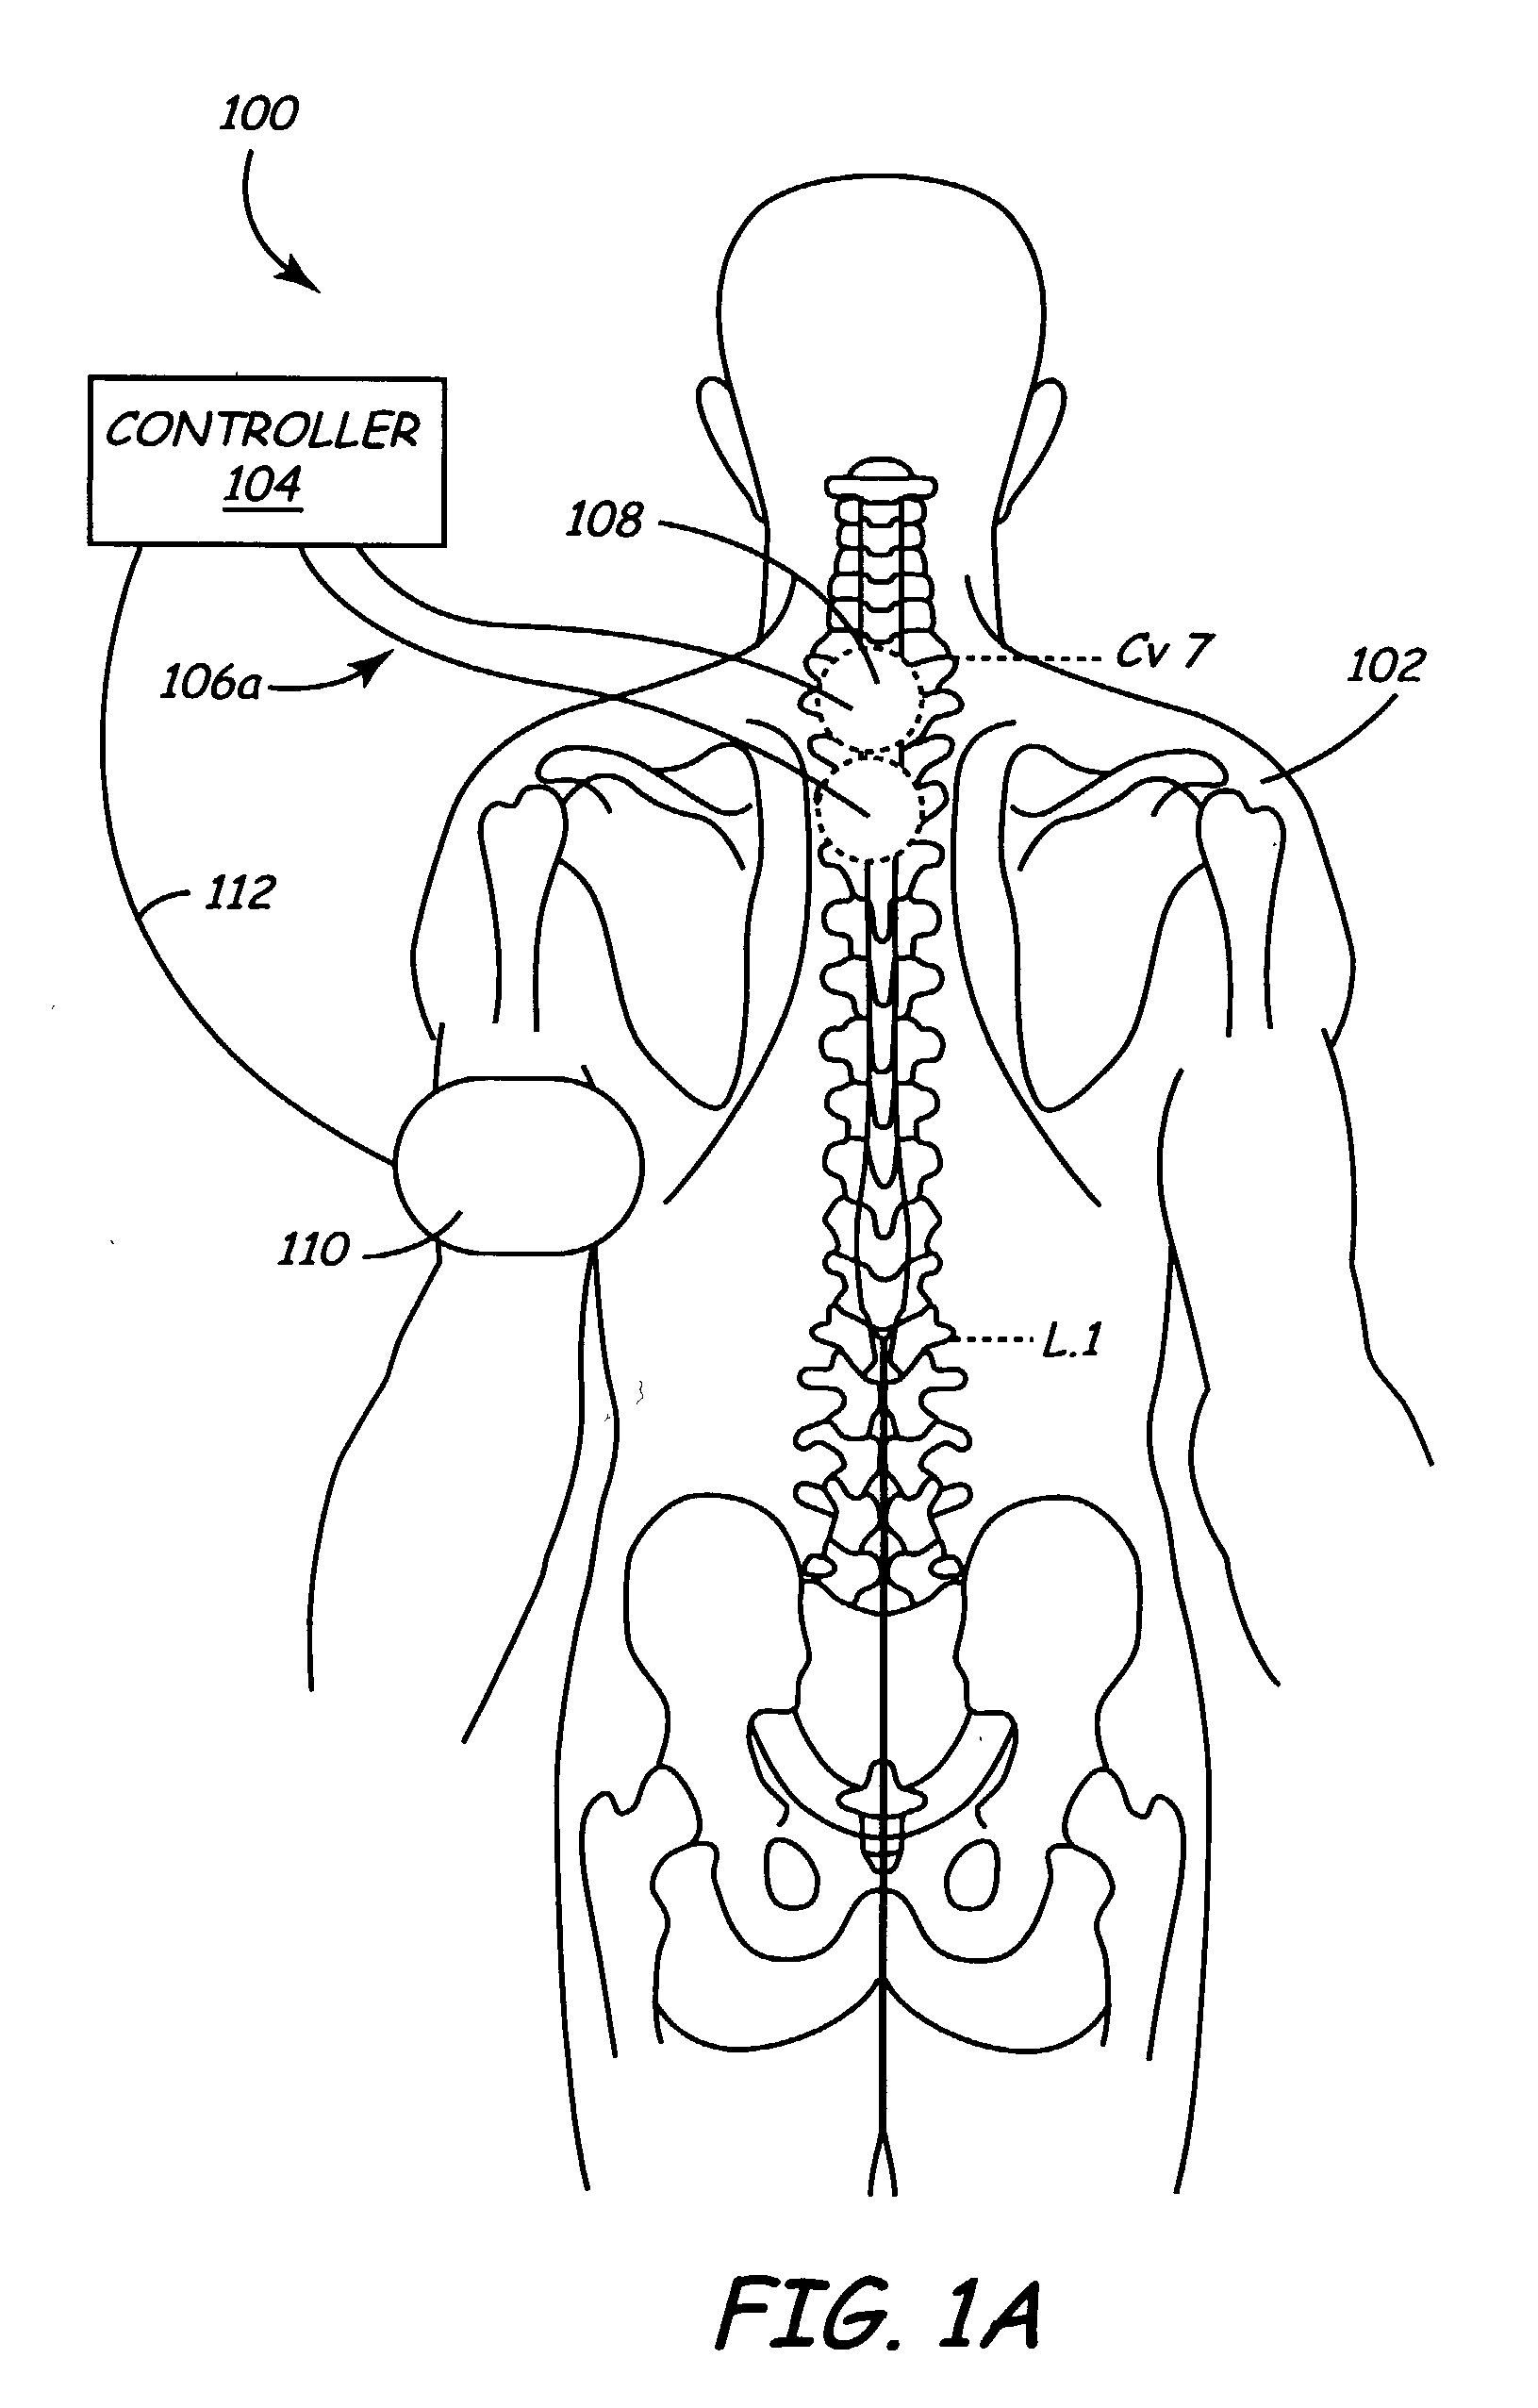 Method and apparatus for electrically stimulating the nervous system to improve ventricular dysfunction, heart failure, and other cardiac conditions